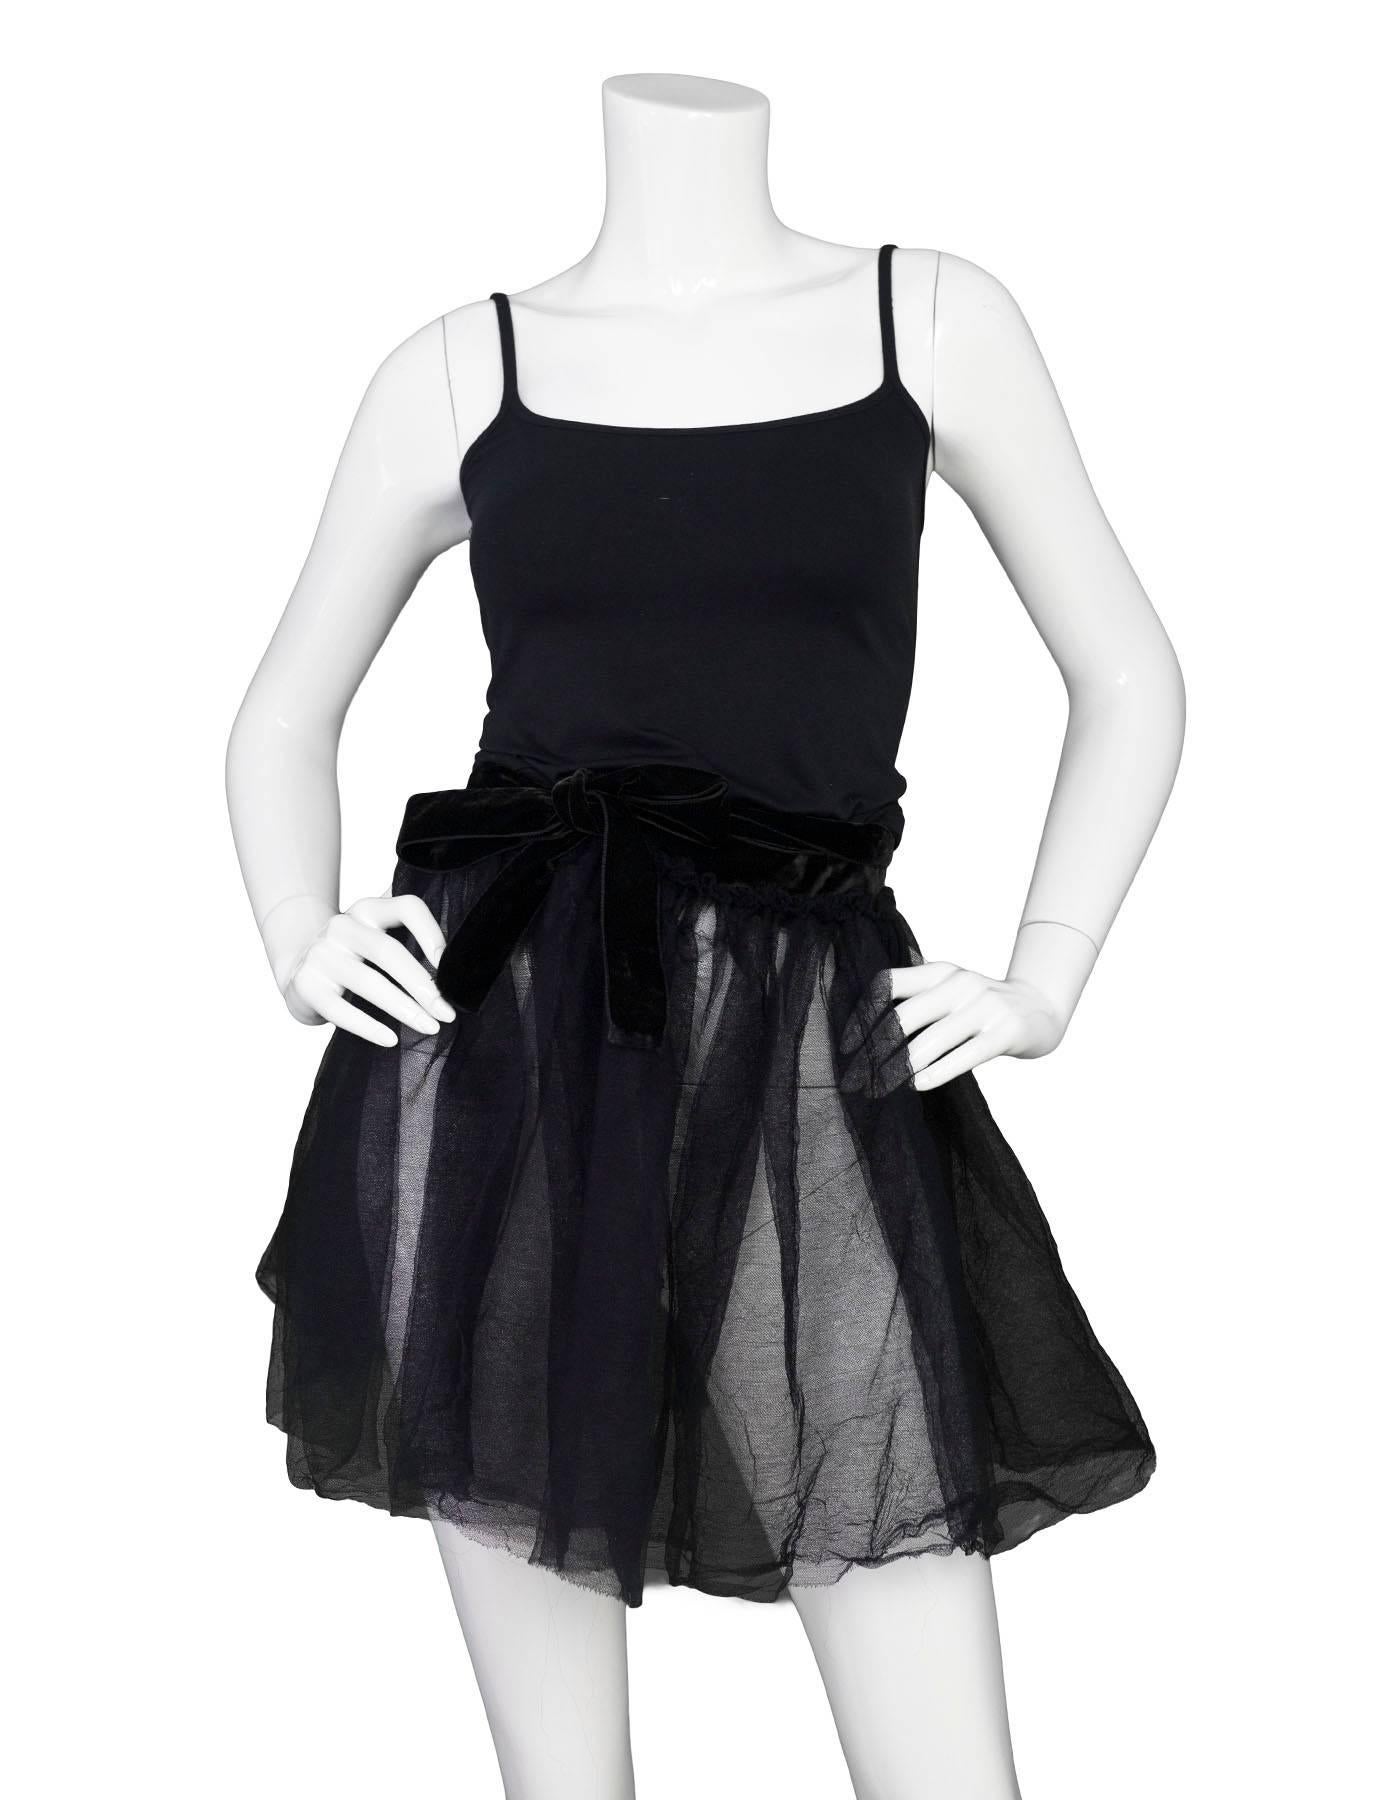 Lanvin Black Tulle Wrap Skirt

Color: Black
Composition: Not listed, feels like nylon blend
Closure/Opening: Velvet waistband with tie closure
Overall Condition: Excellent pre-owned condition

Measurements:
Waist: 30